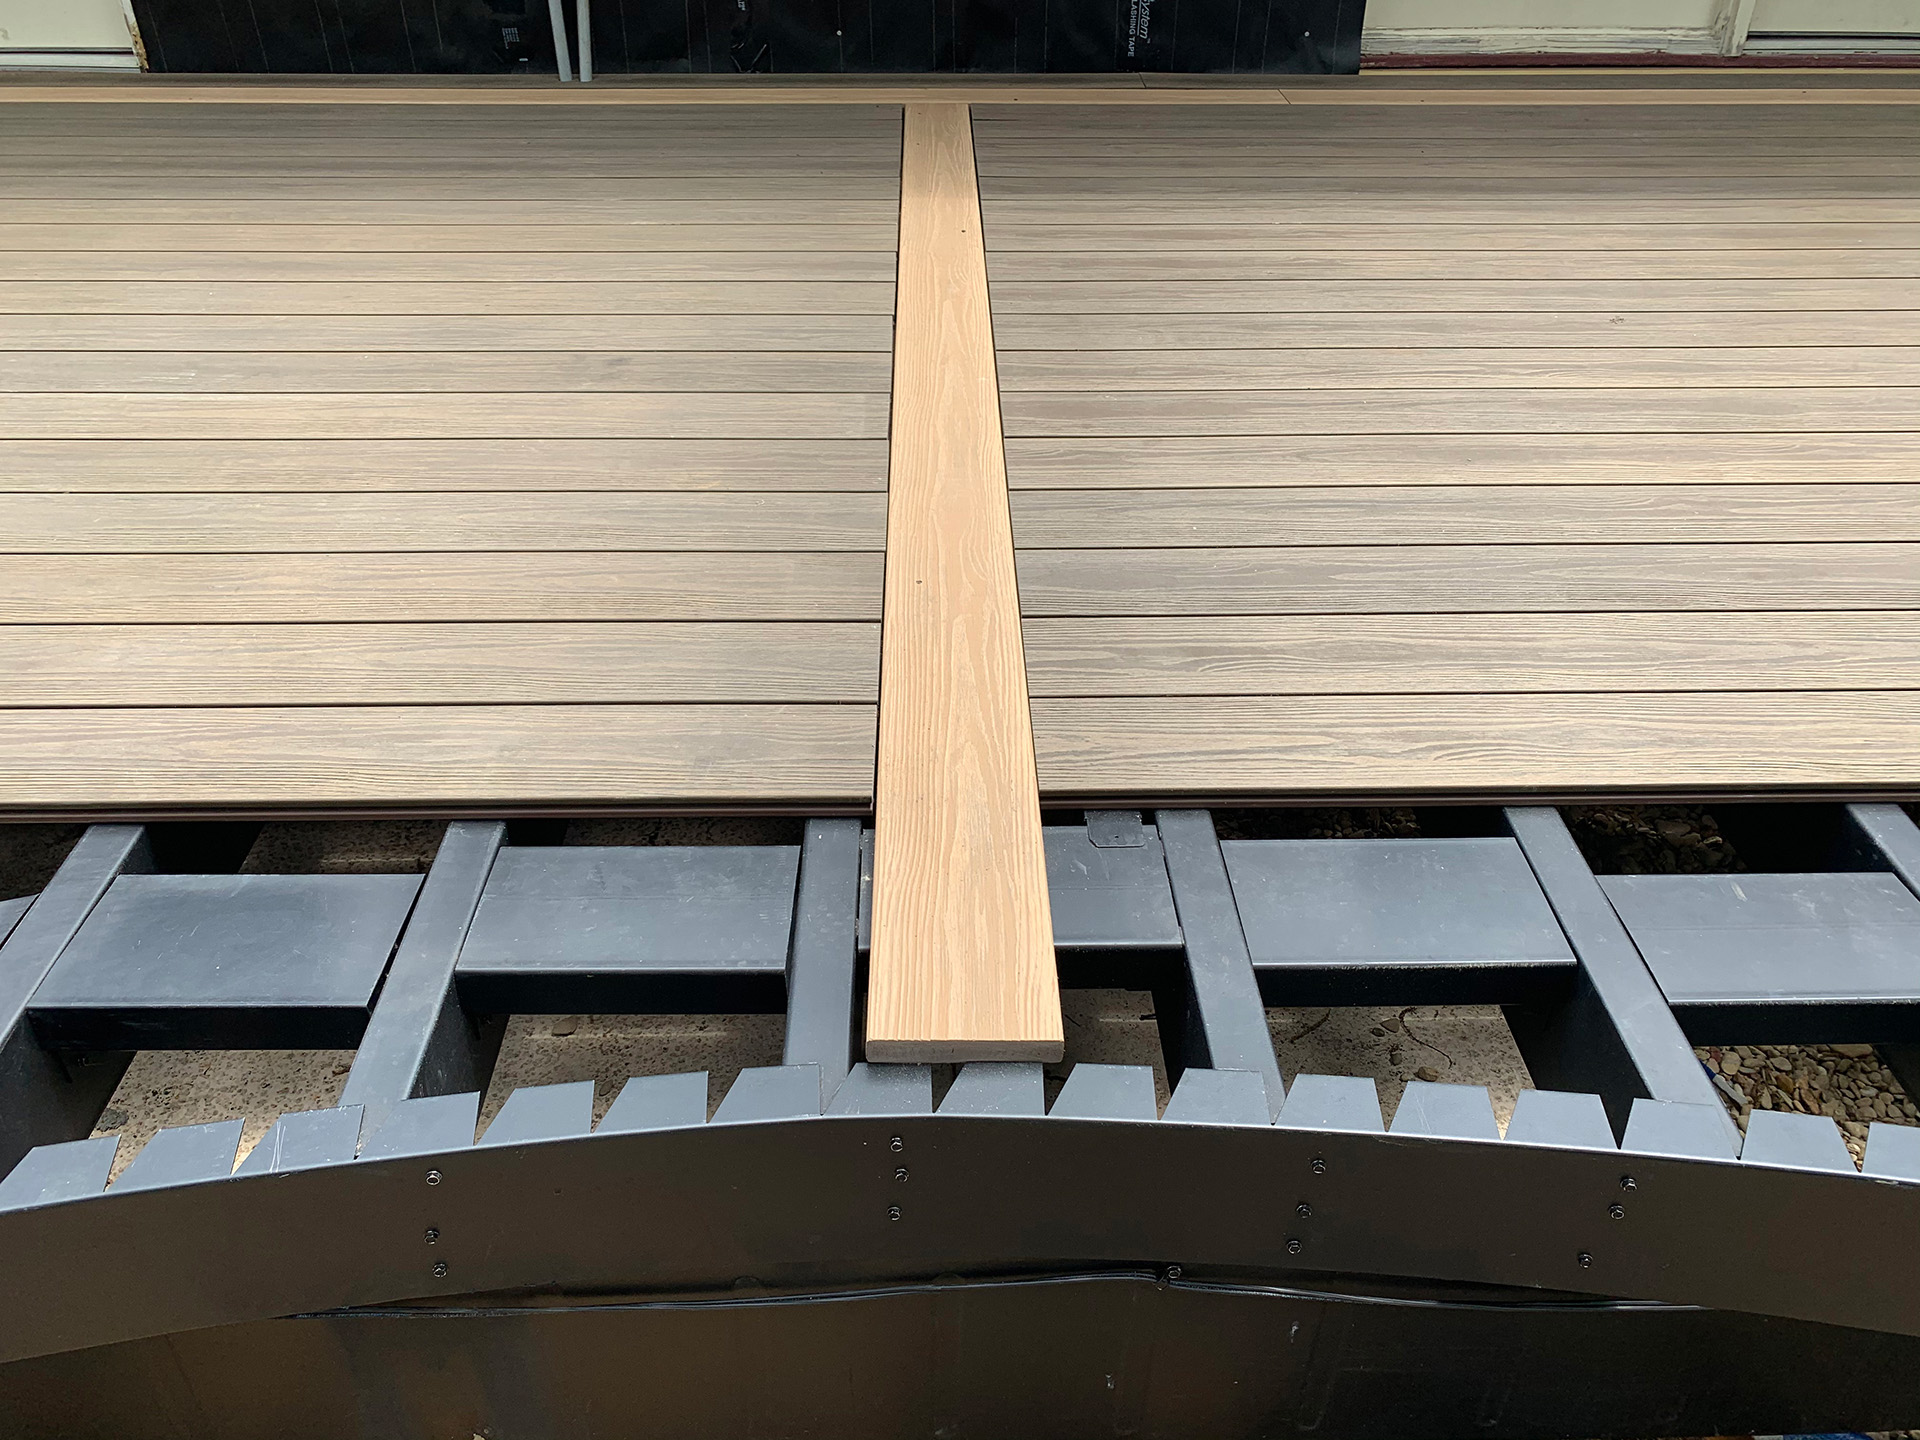 Close-up view of a steel deck joist system with composite decking boards being installed.